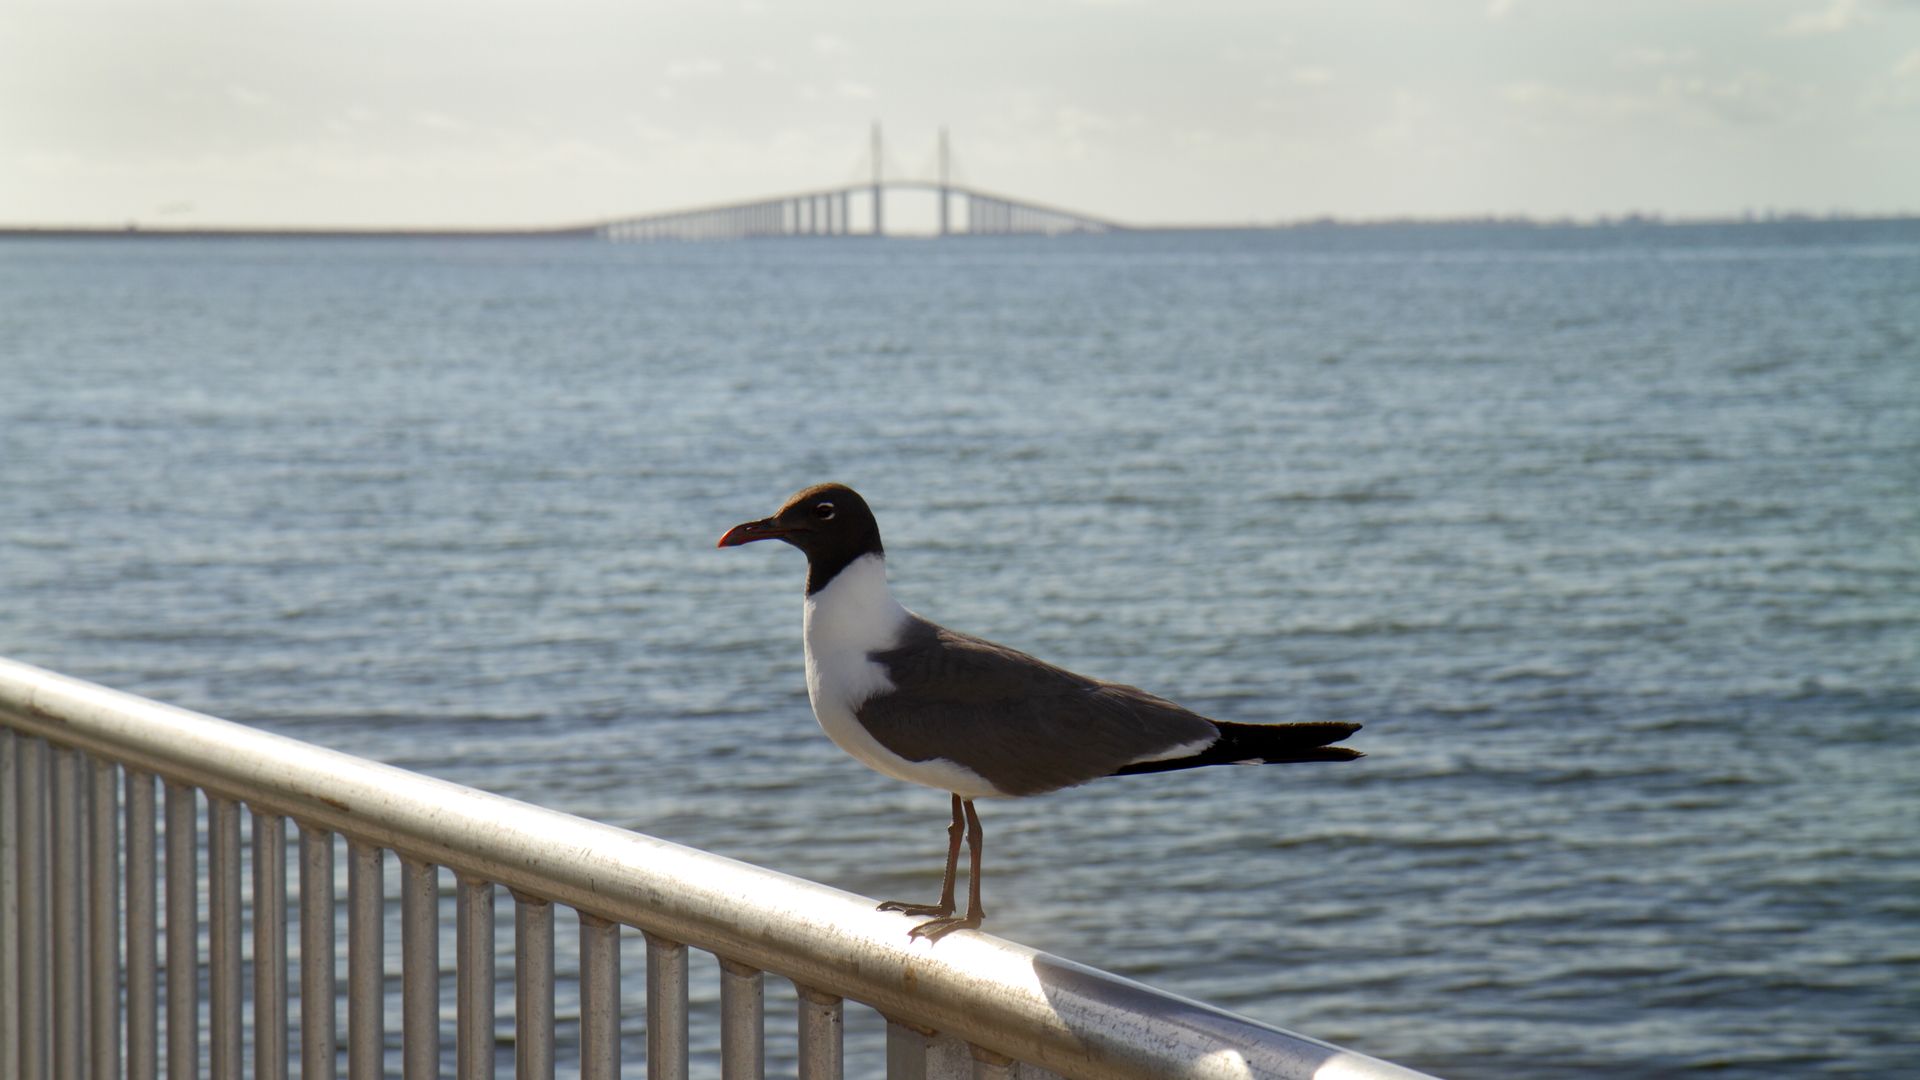 a seagull on a railing with the skyway bridge in the background